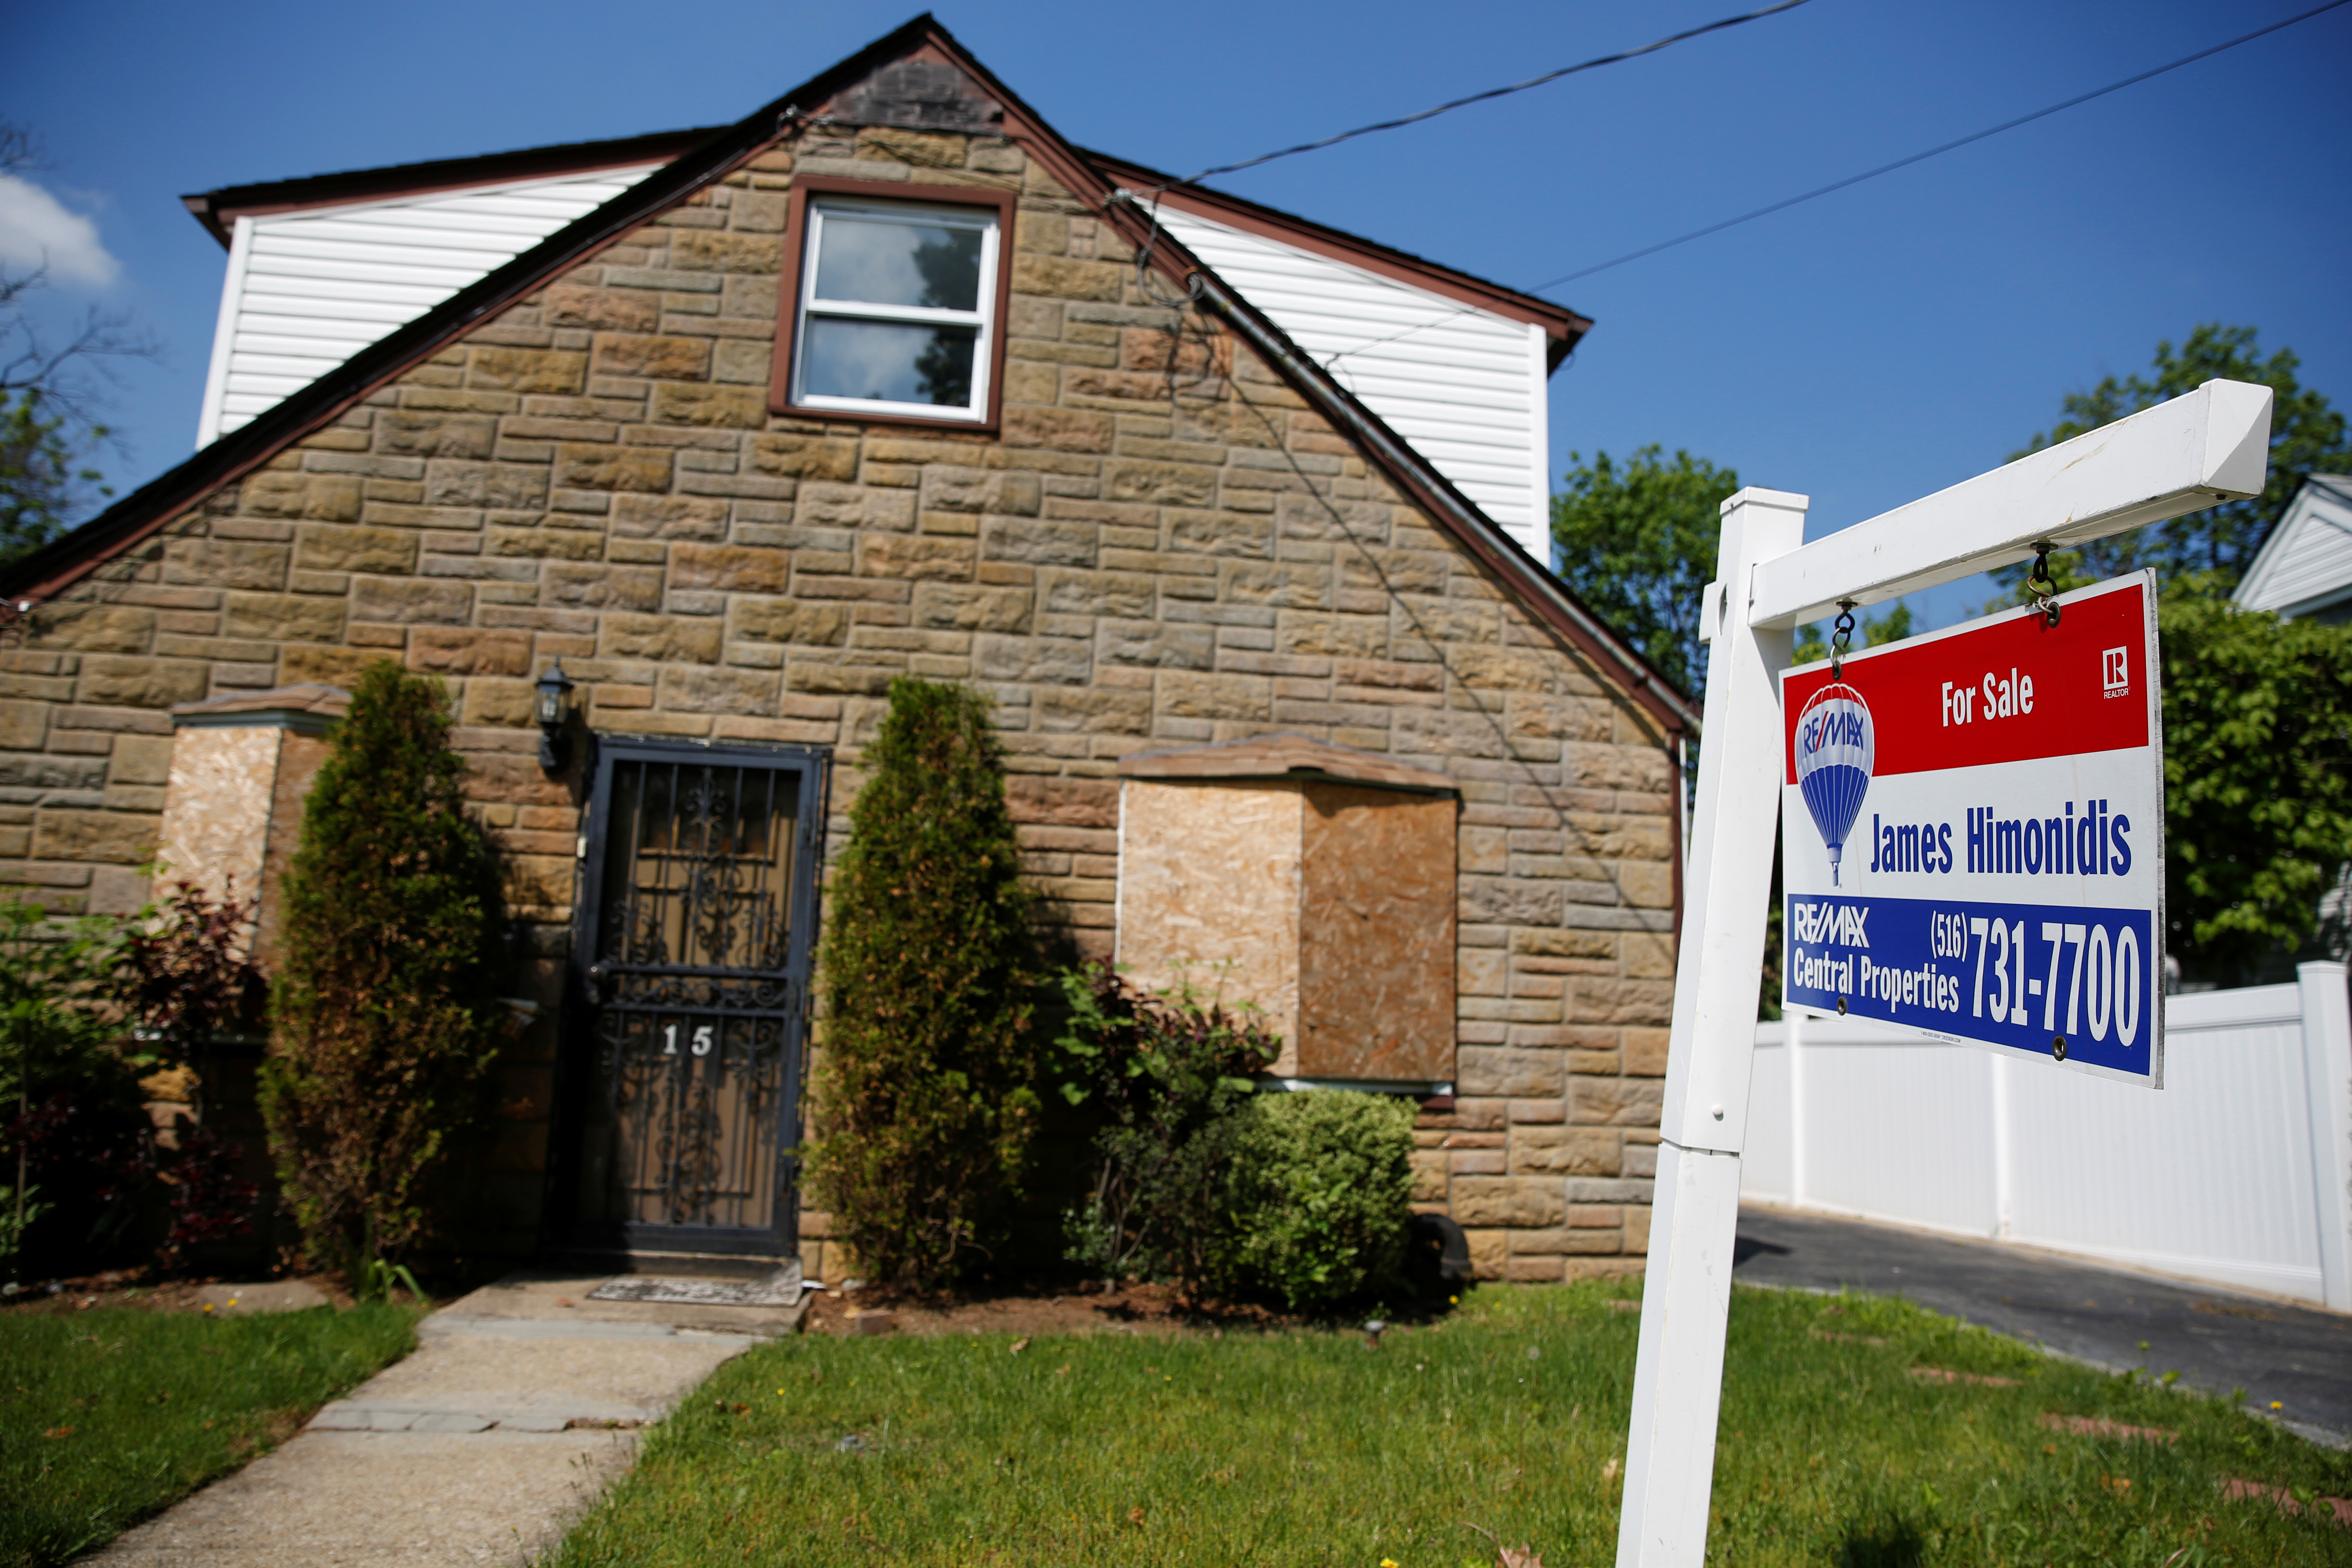 A 'for sale' is seen outside a single family house in Garden City New York